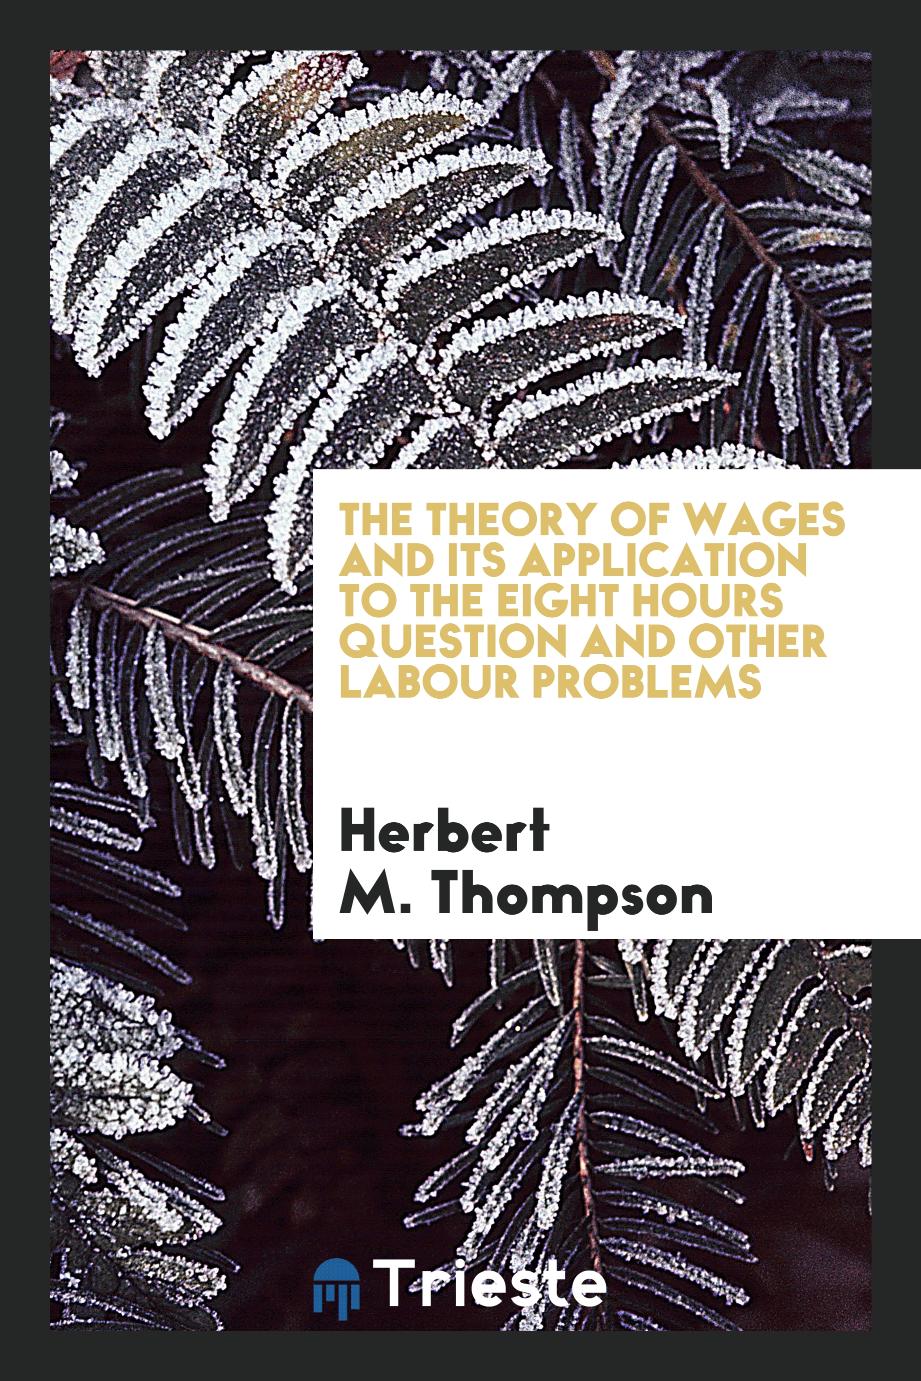 The theory of wages and its application to the eight hours question and other labour problems